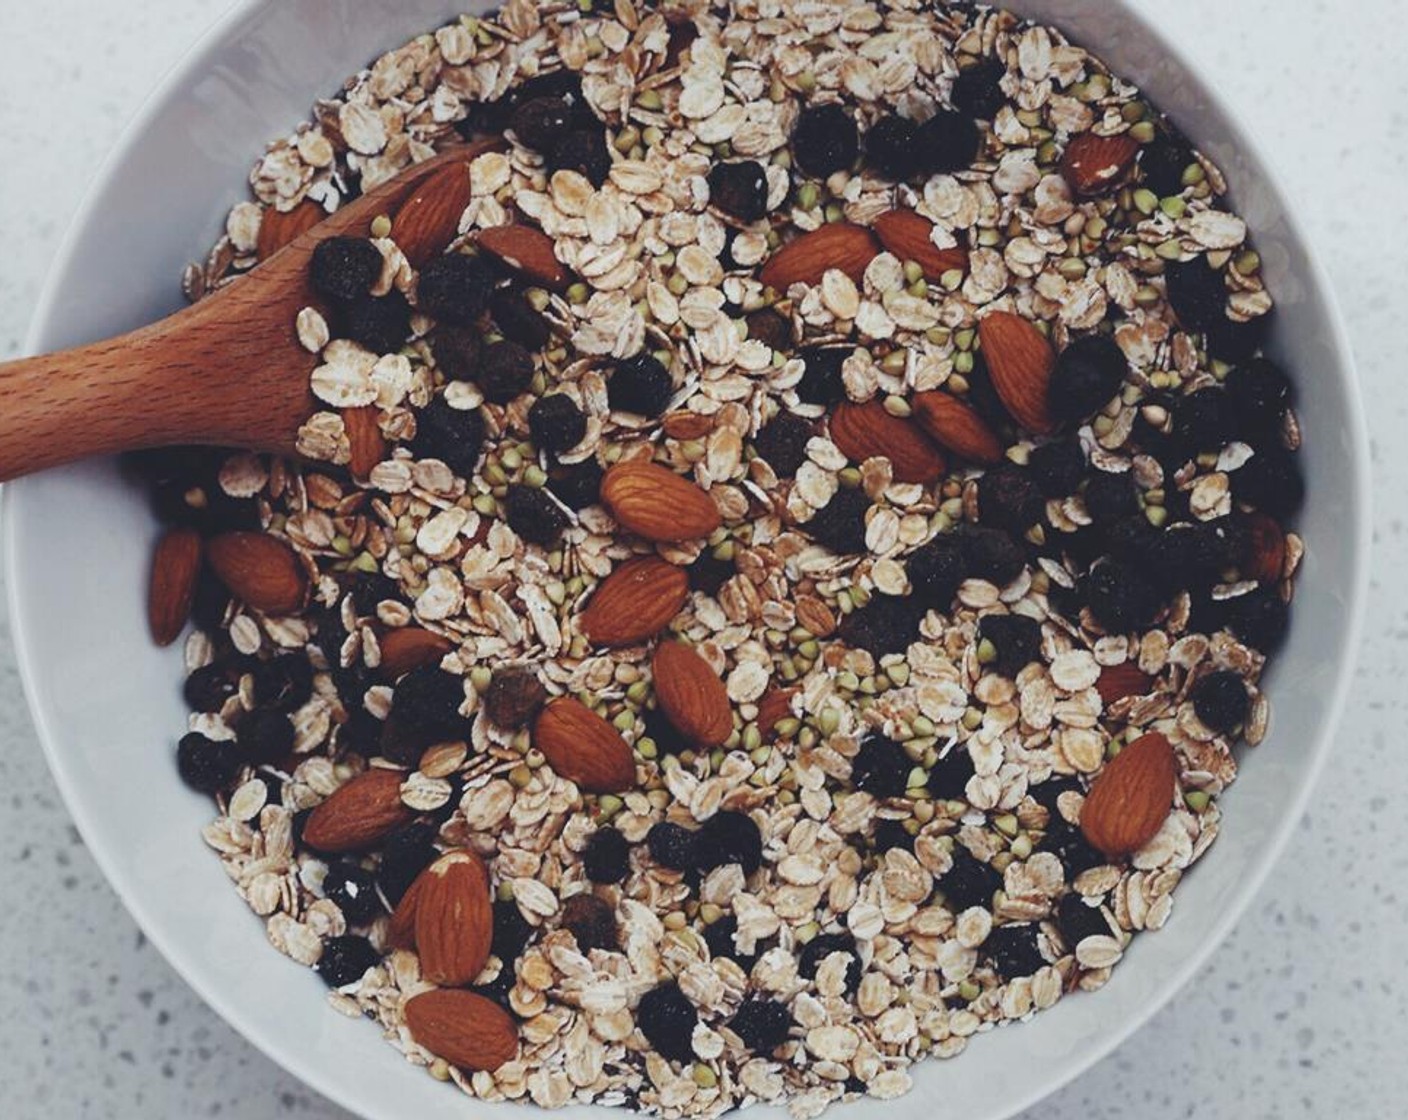 step 2 In a large bowl, stir together the Old Fashioned Rolled Oats (2 cups), Buckwheat Groats (1 cup), Dried Blueberries (1 cup), Raw Almonds (1 cup), Chia Seeds (1/4 cup) and Ground Cinnamon (1 tsp).